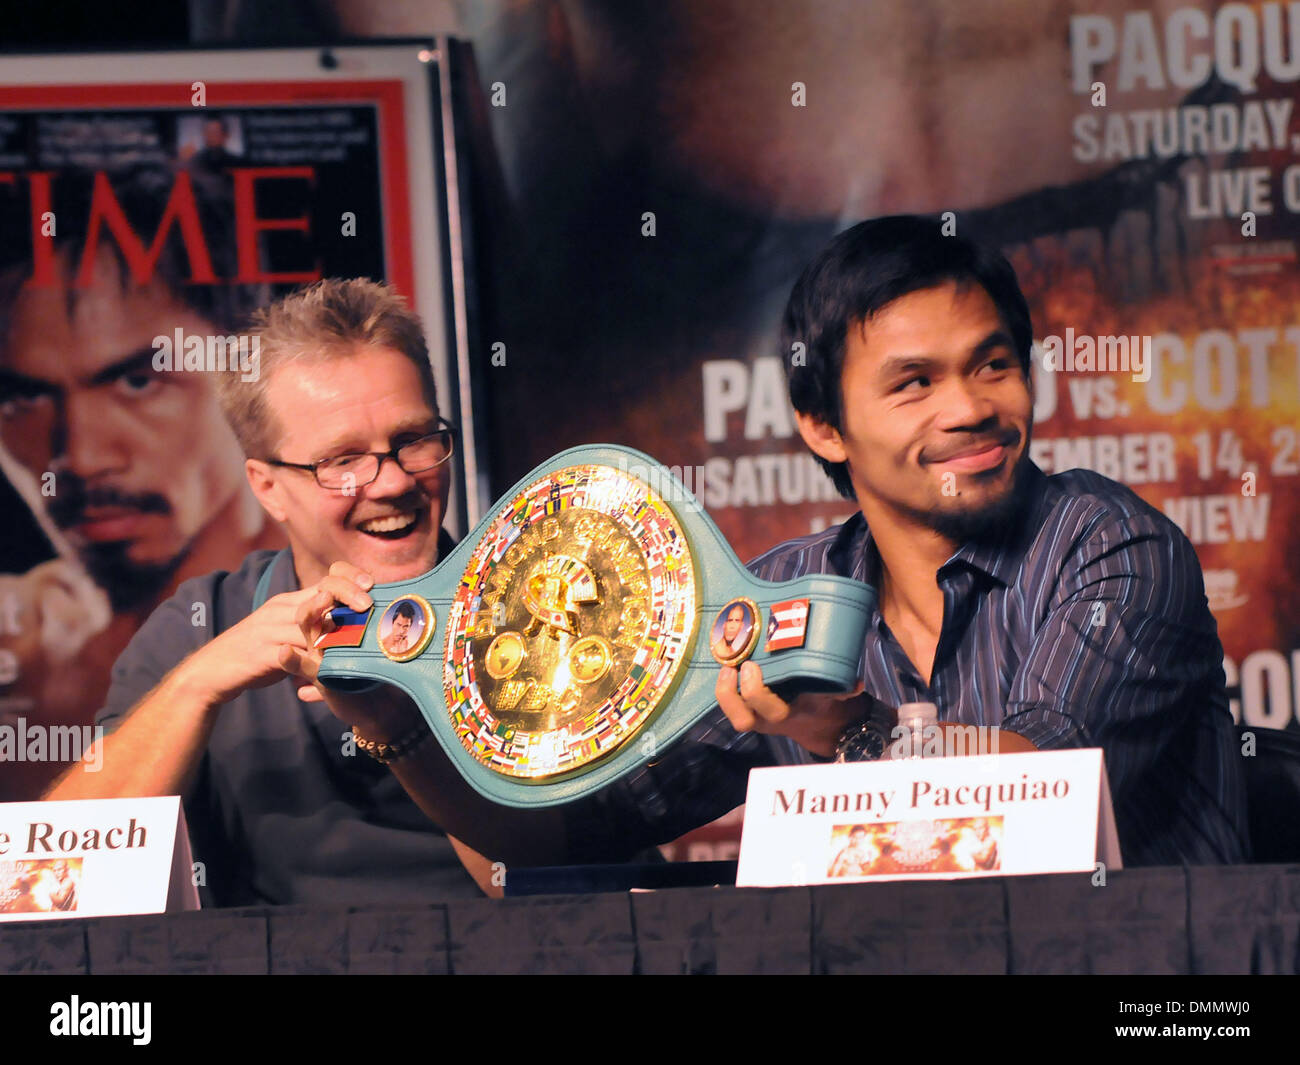 Nov 11, 2009 - Las Vegas, Nevada, USA - Boxer MANNY PACQUIAO, right, with trainer, FREDDIE ROACH hold up the Diamond Belt, during the final news conference at the MGM Grand before Pacquiao's  WBO welterweight championship bout against  Miguel Cotto on Saturday, Nov. 14, 2009 at the MGM Grand Garden Arena. (Credit Image: © David Becker/ZUMApress.com) Stock Photo